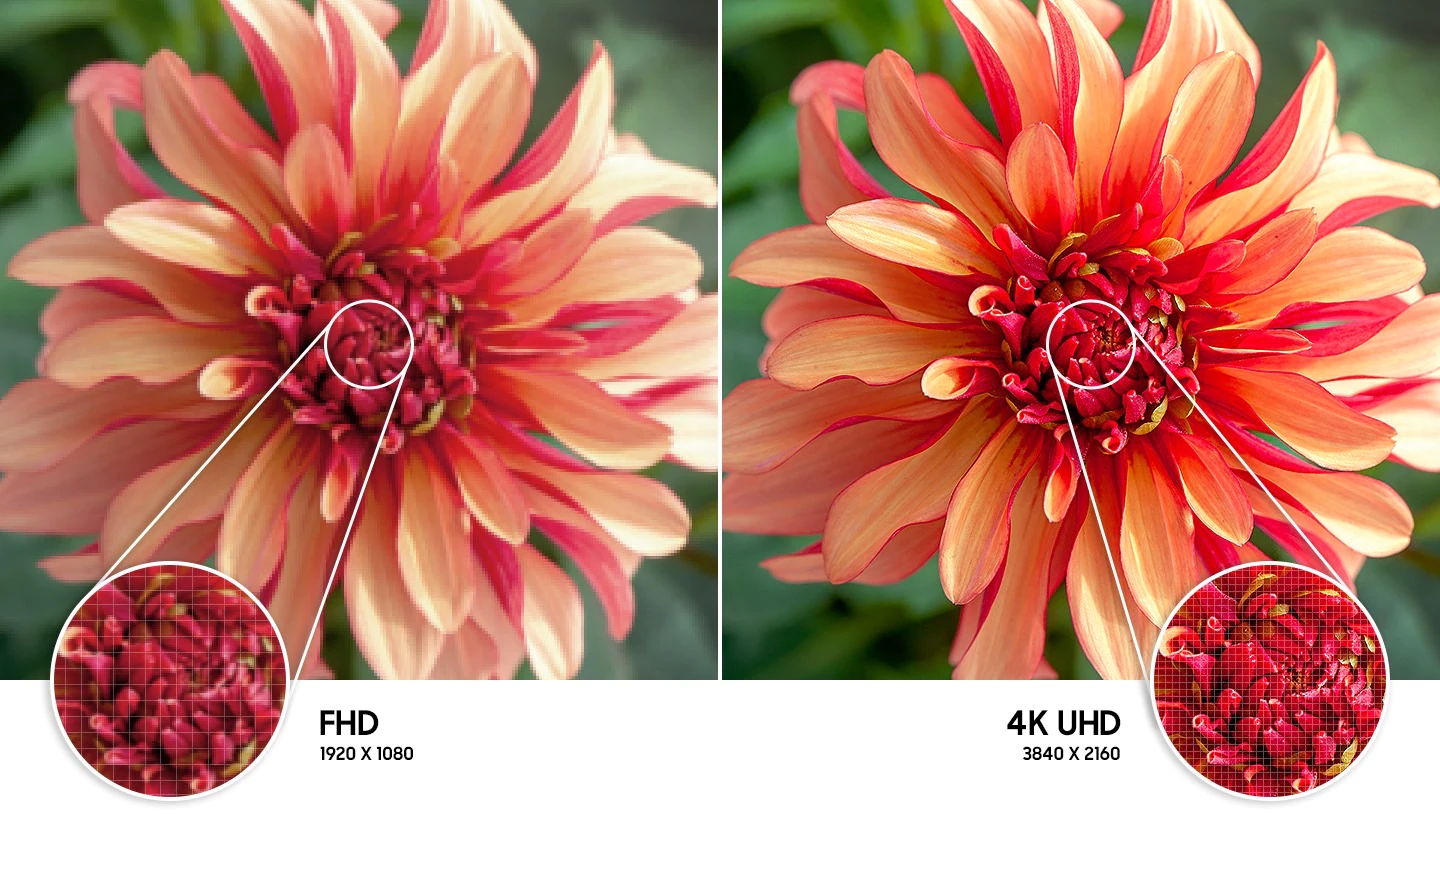 ru-feature-feel-the-reality-of-4k-uhd-re